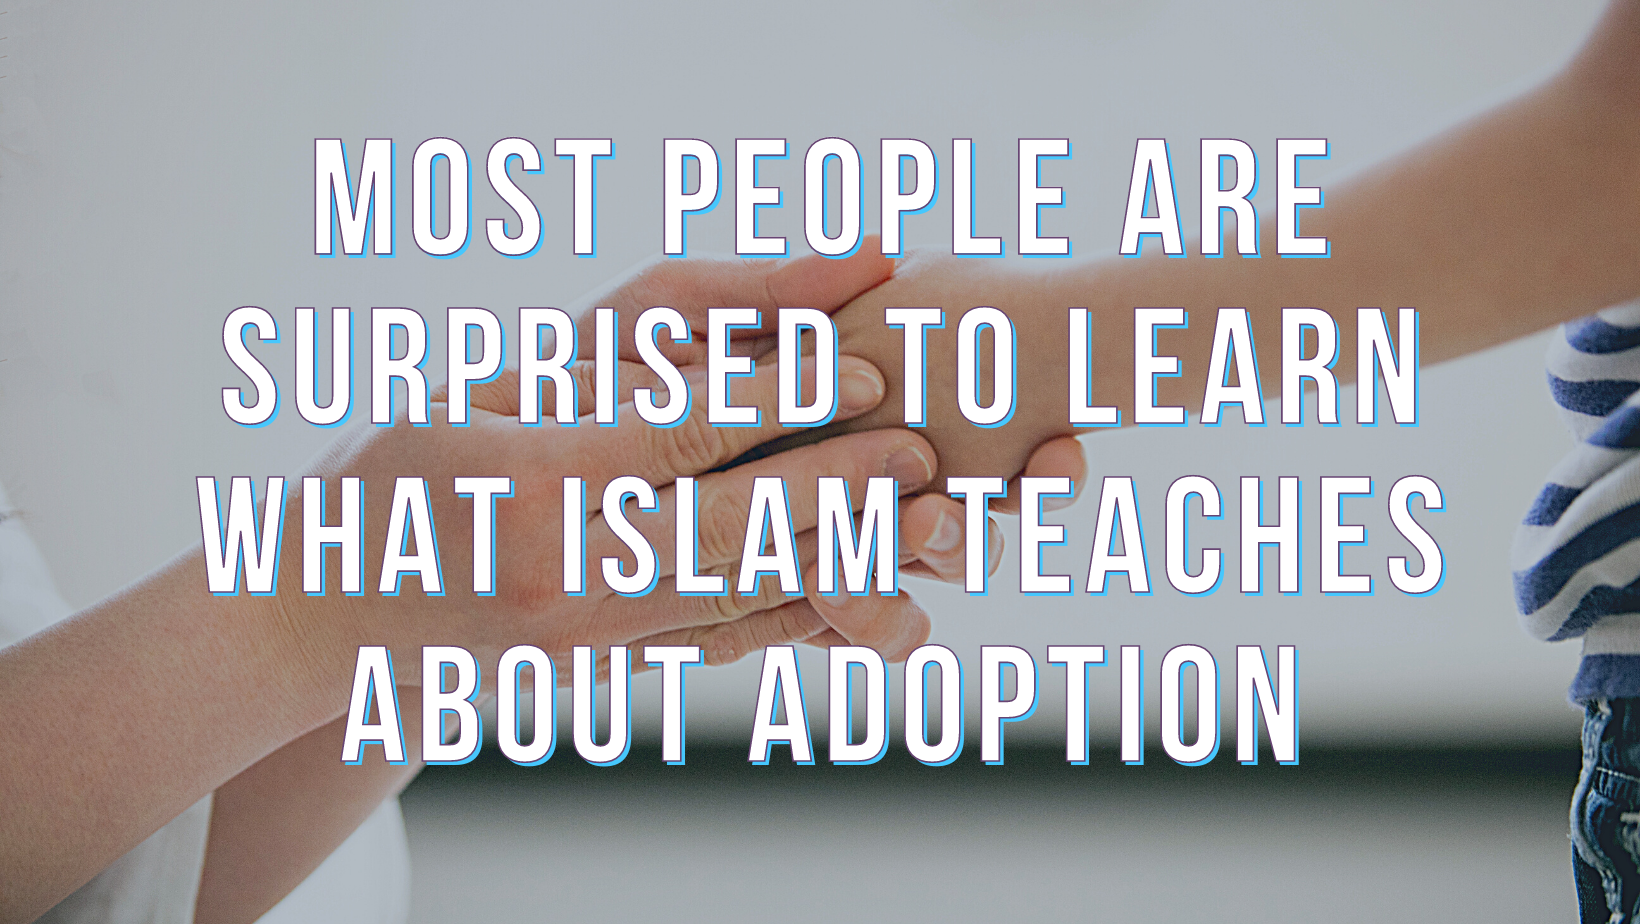 Most people are surprised to learn what Islam teaches about adoption